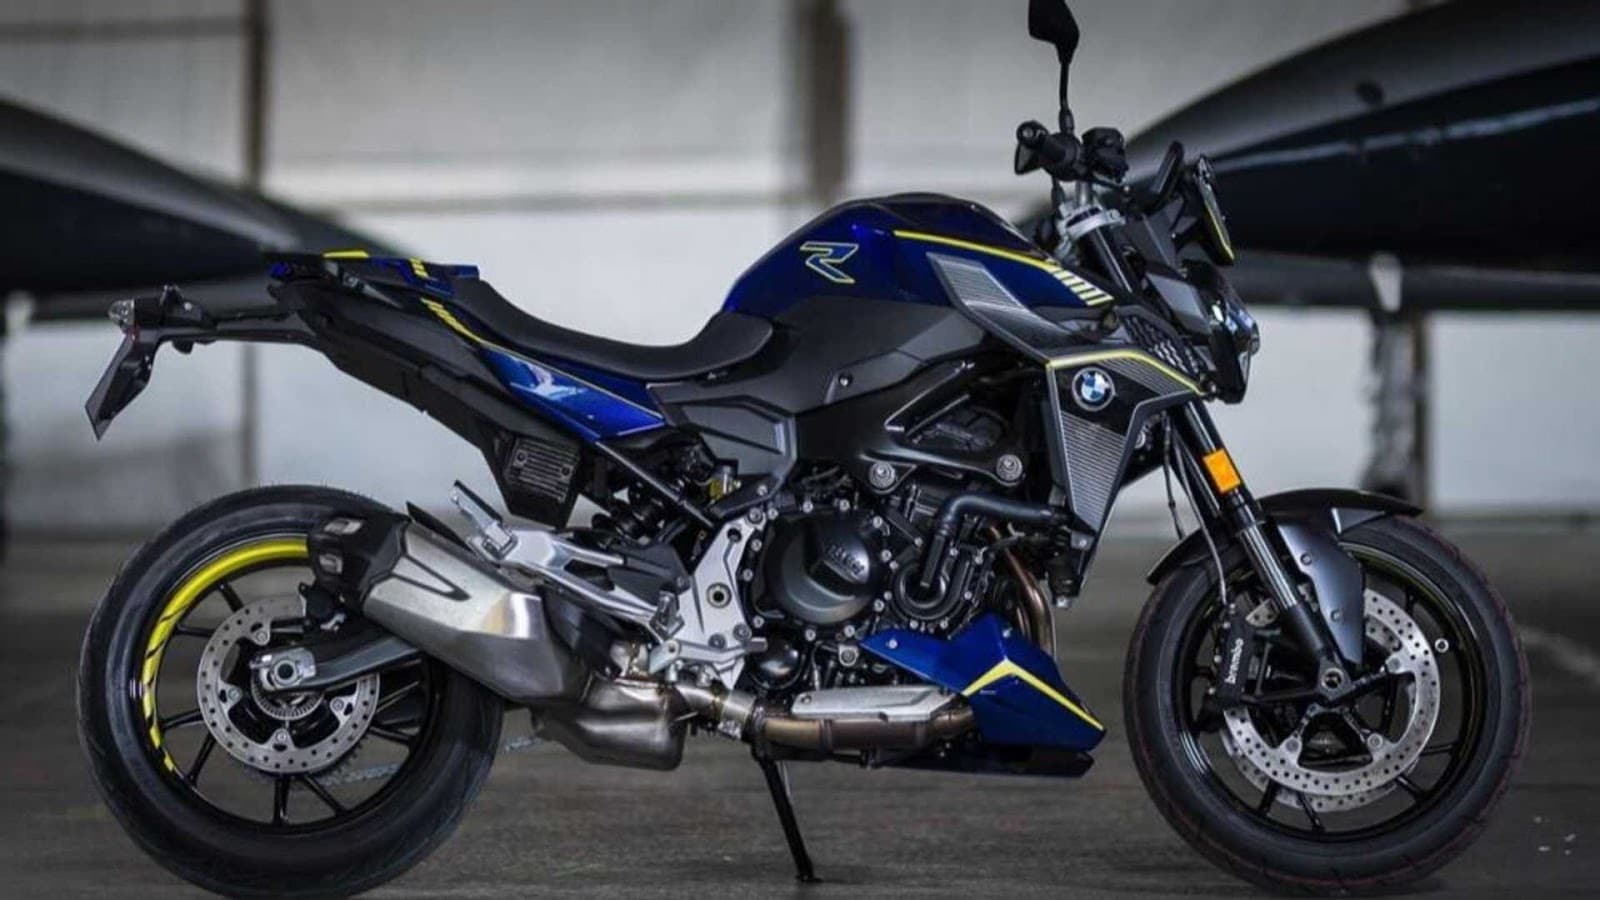 Only 300 units of the F 900 R Force will be produced.